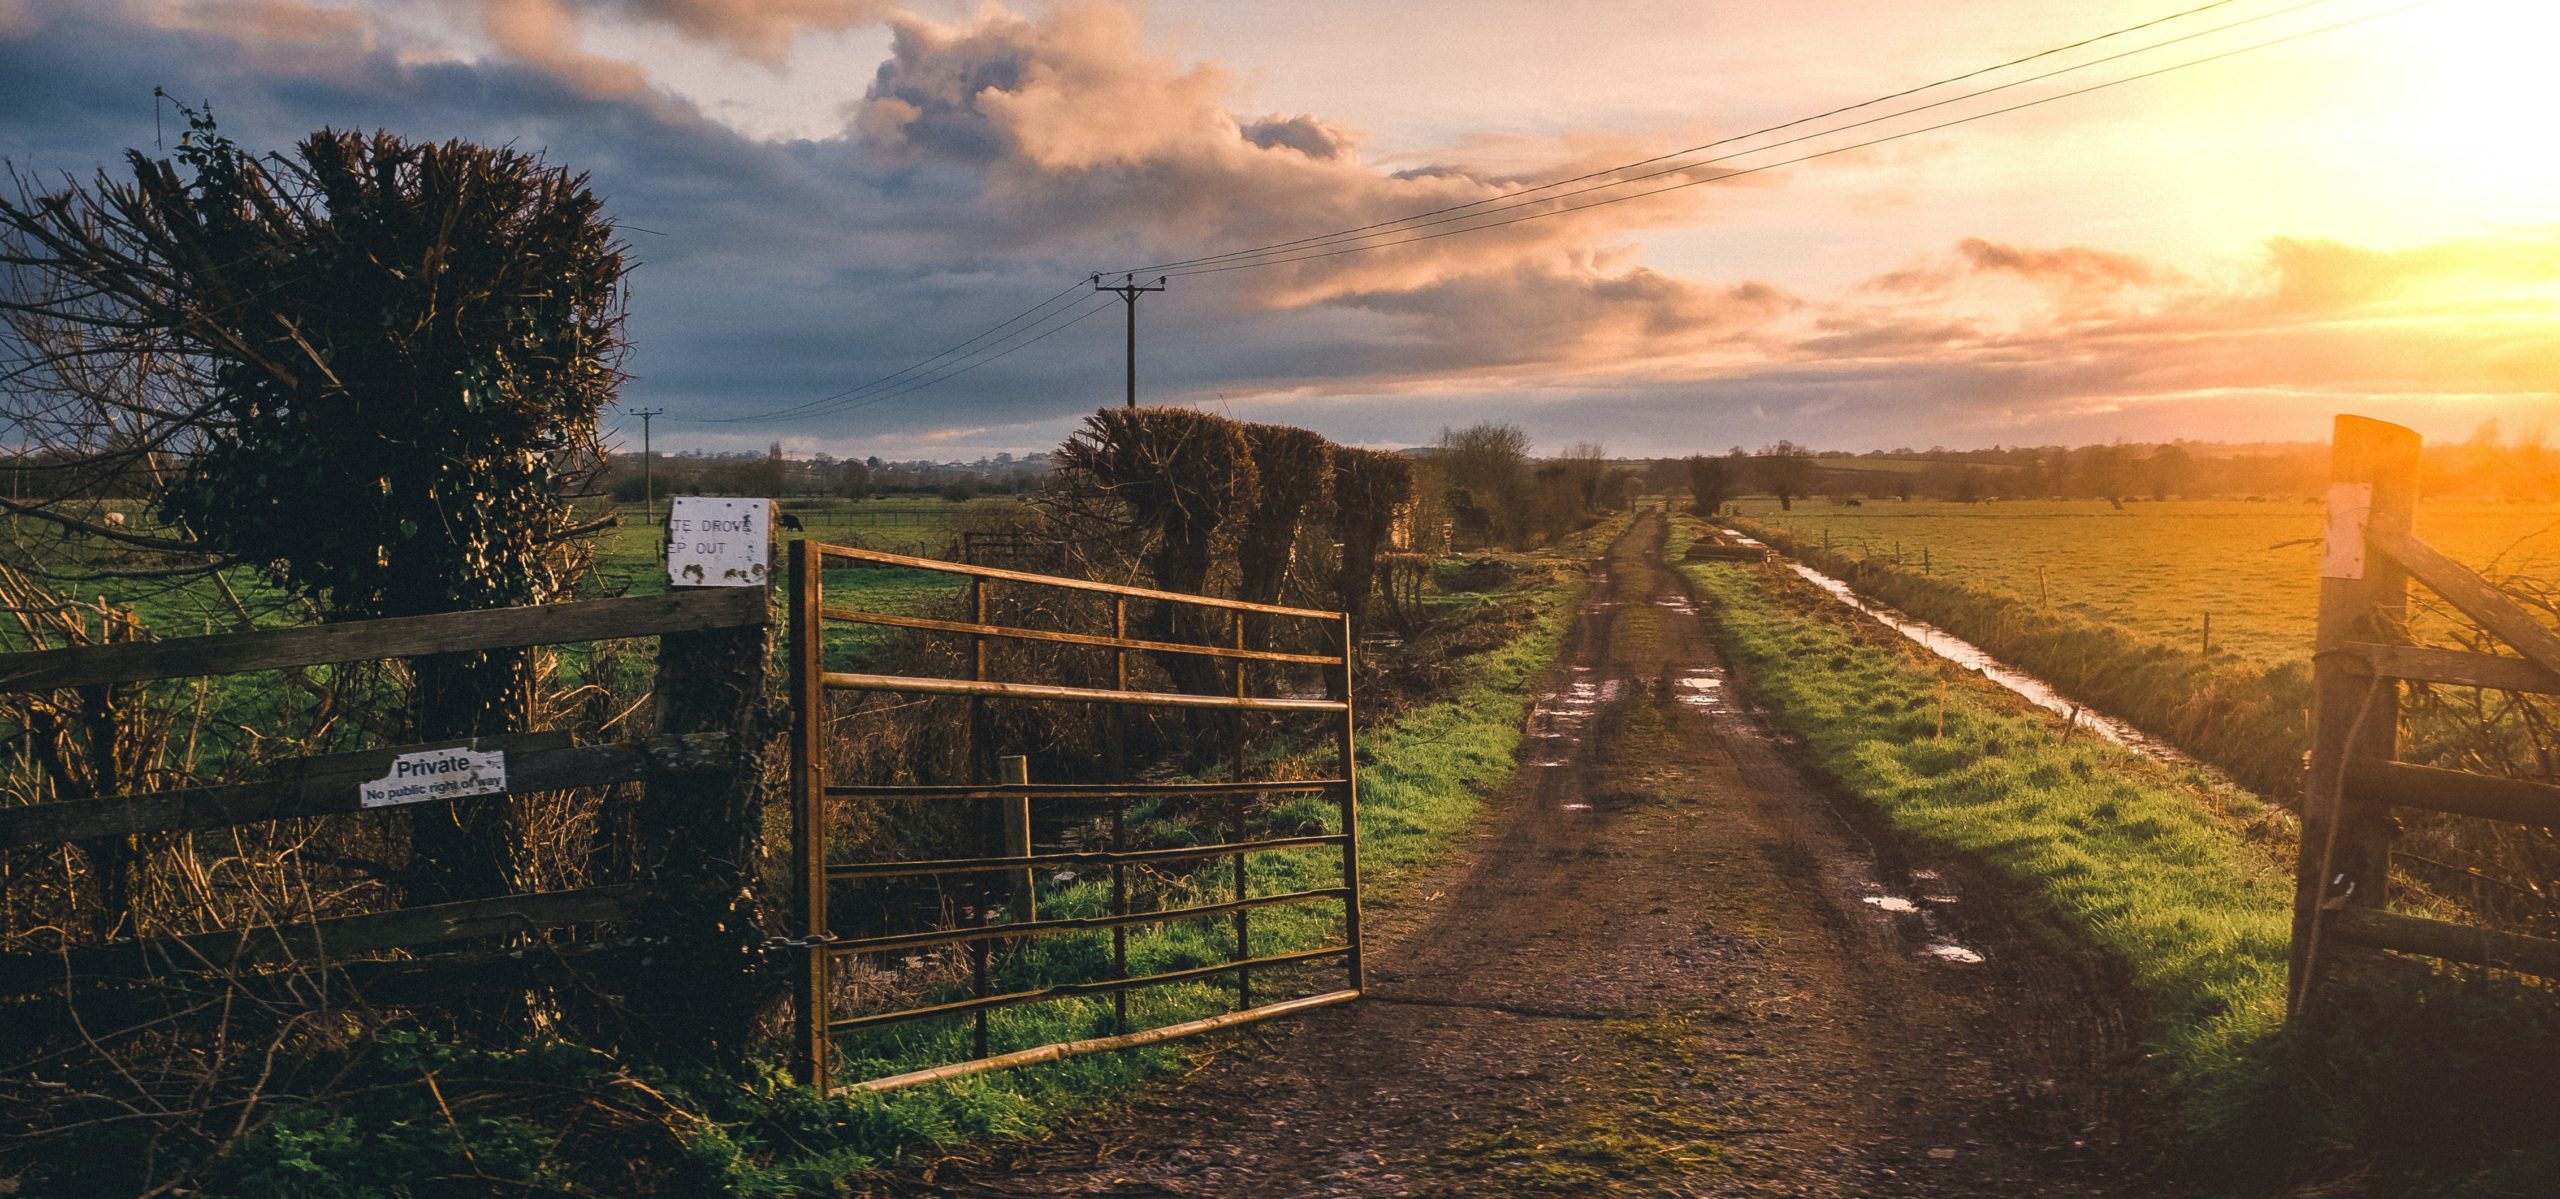 To fence or not to fence – the new stock exclusion regulations